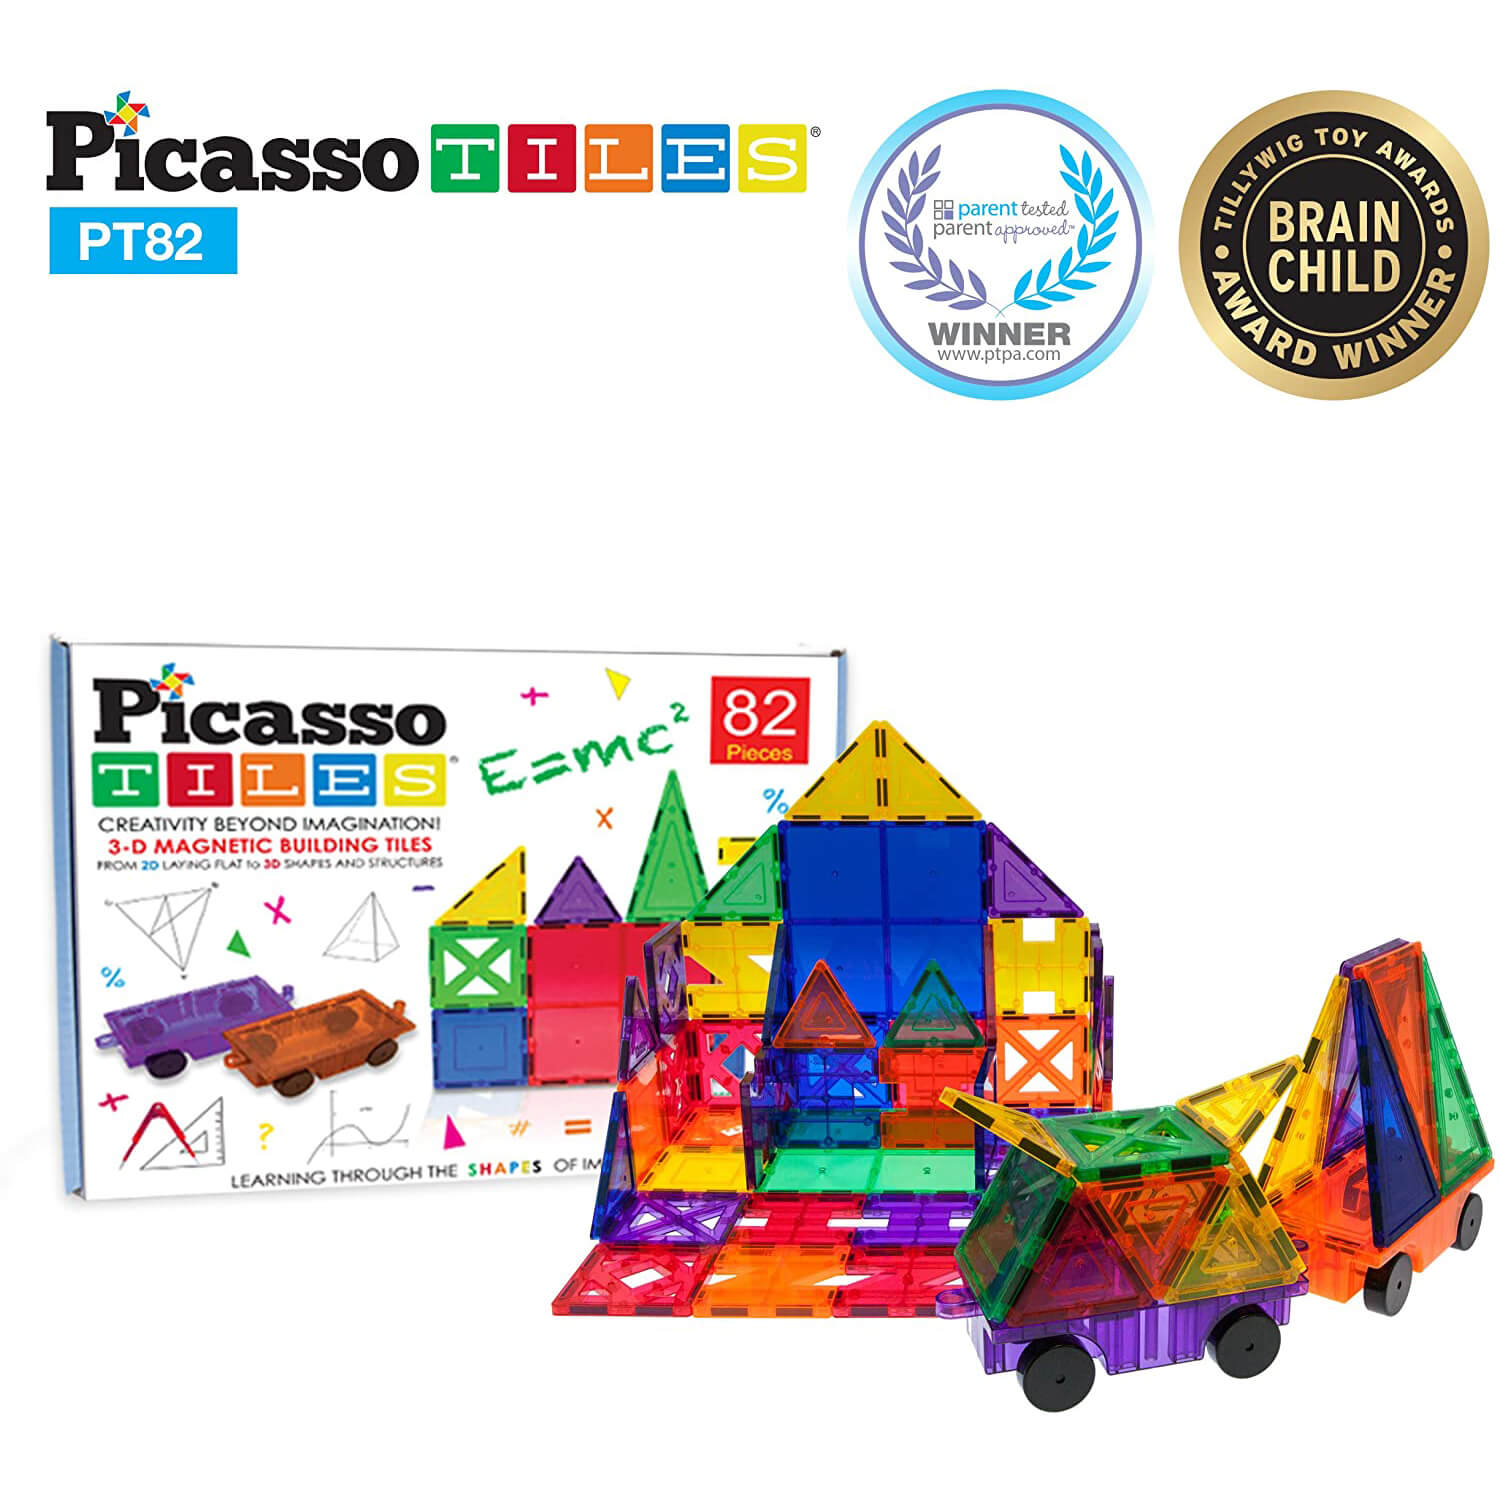 PicassoTiles Magentic Tiles 82 Piece Building Set with 2 Cars